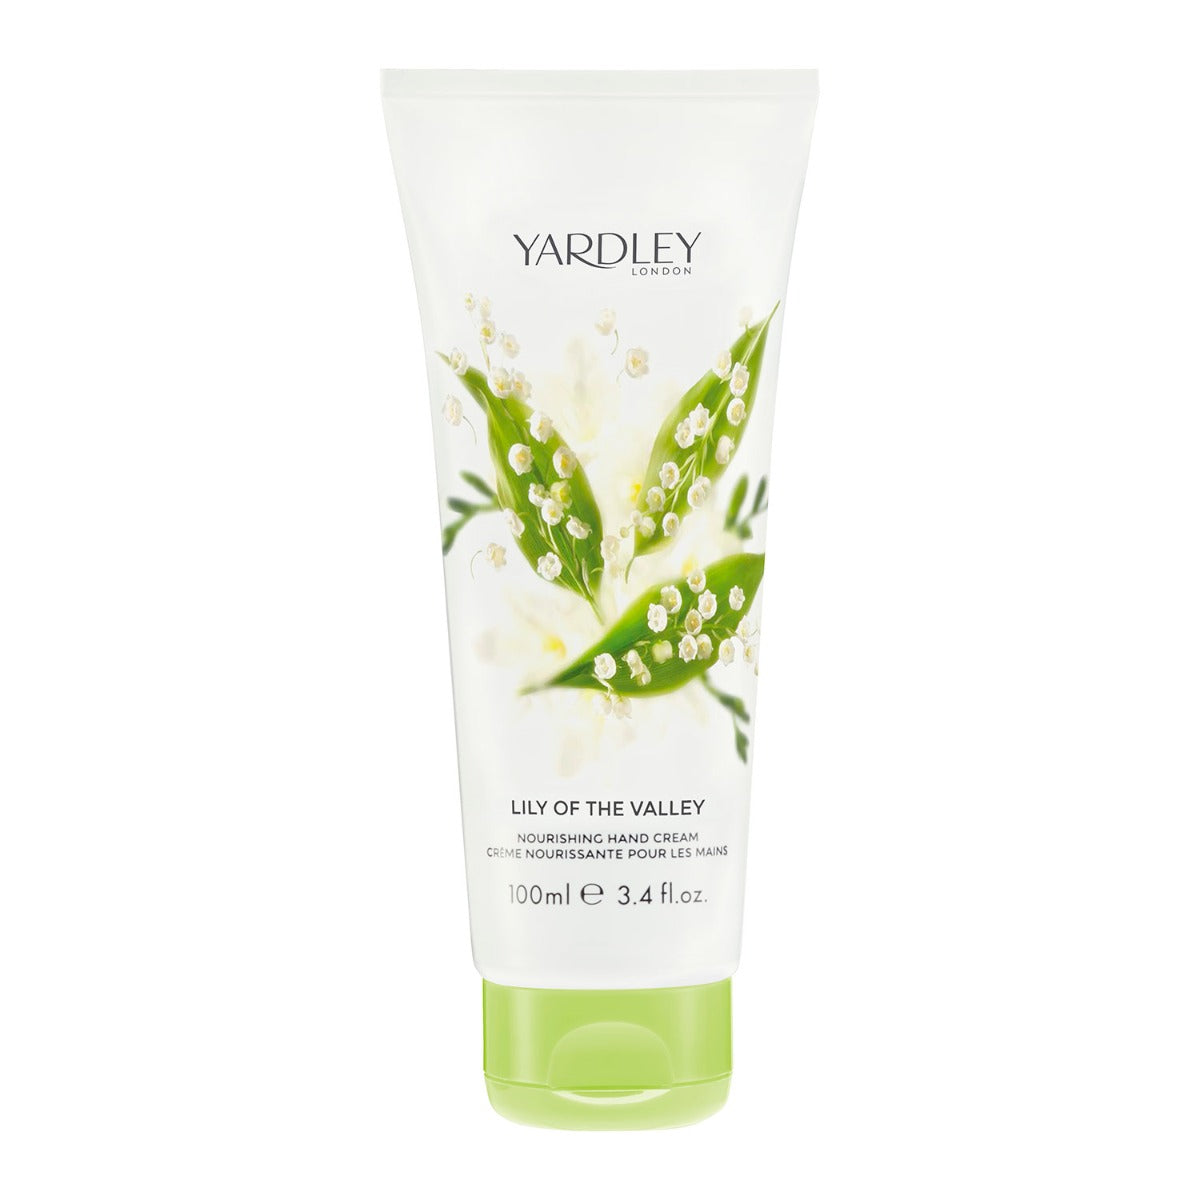 Lily of the Valley Nourishing Hand Cream for her